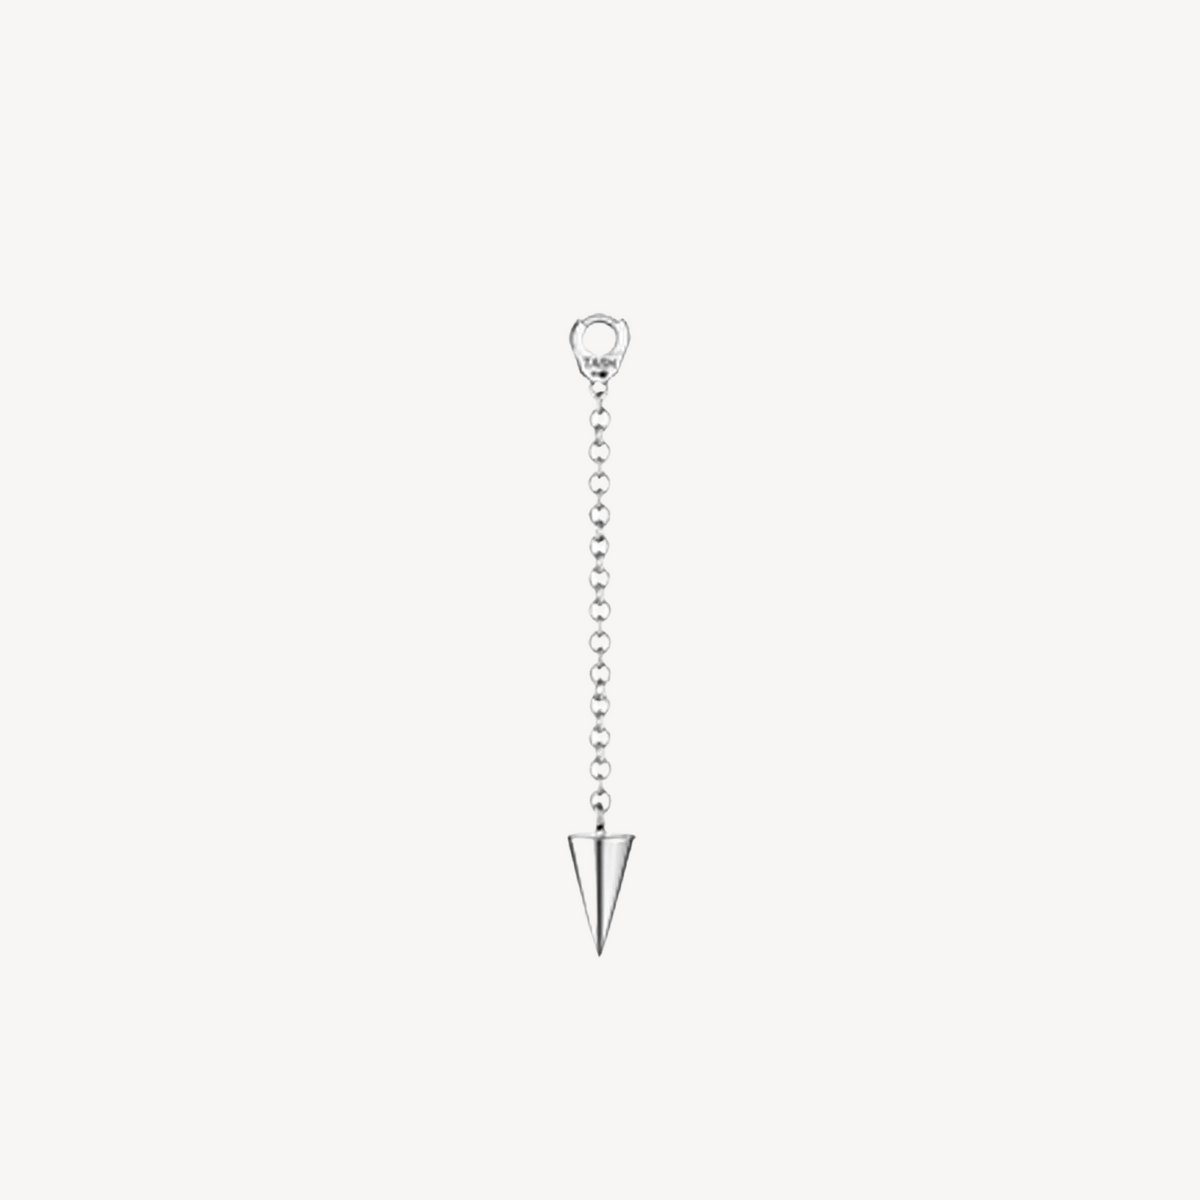 Pendulum Charm with Short Spike White Gold